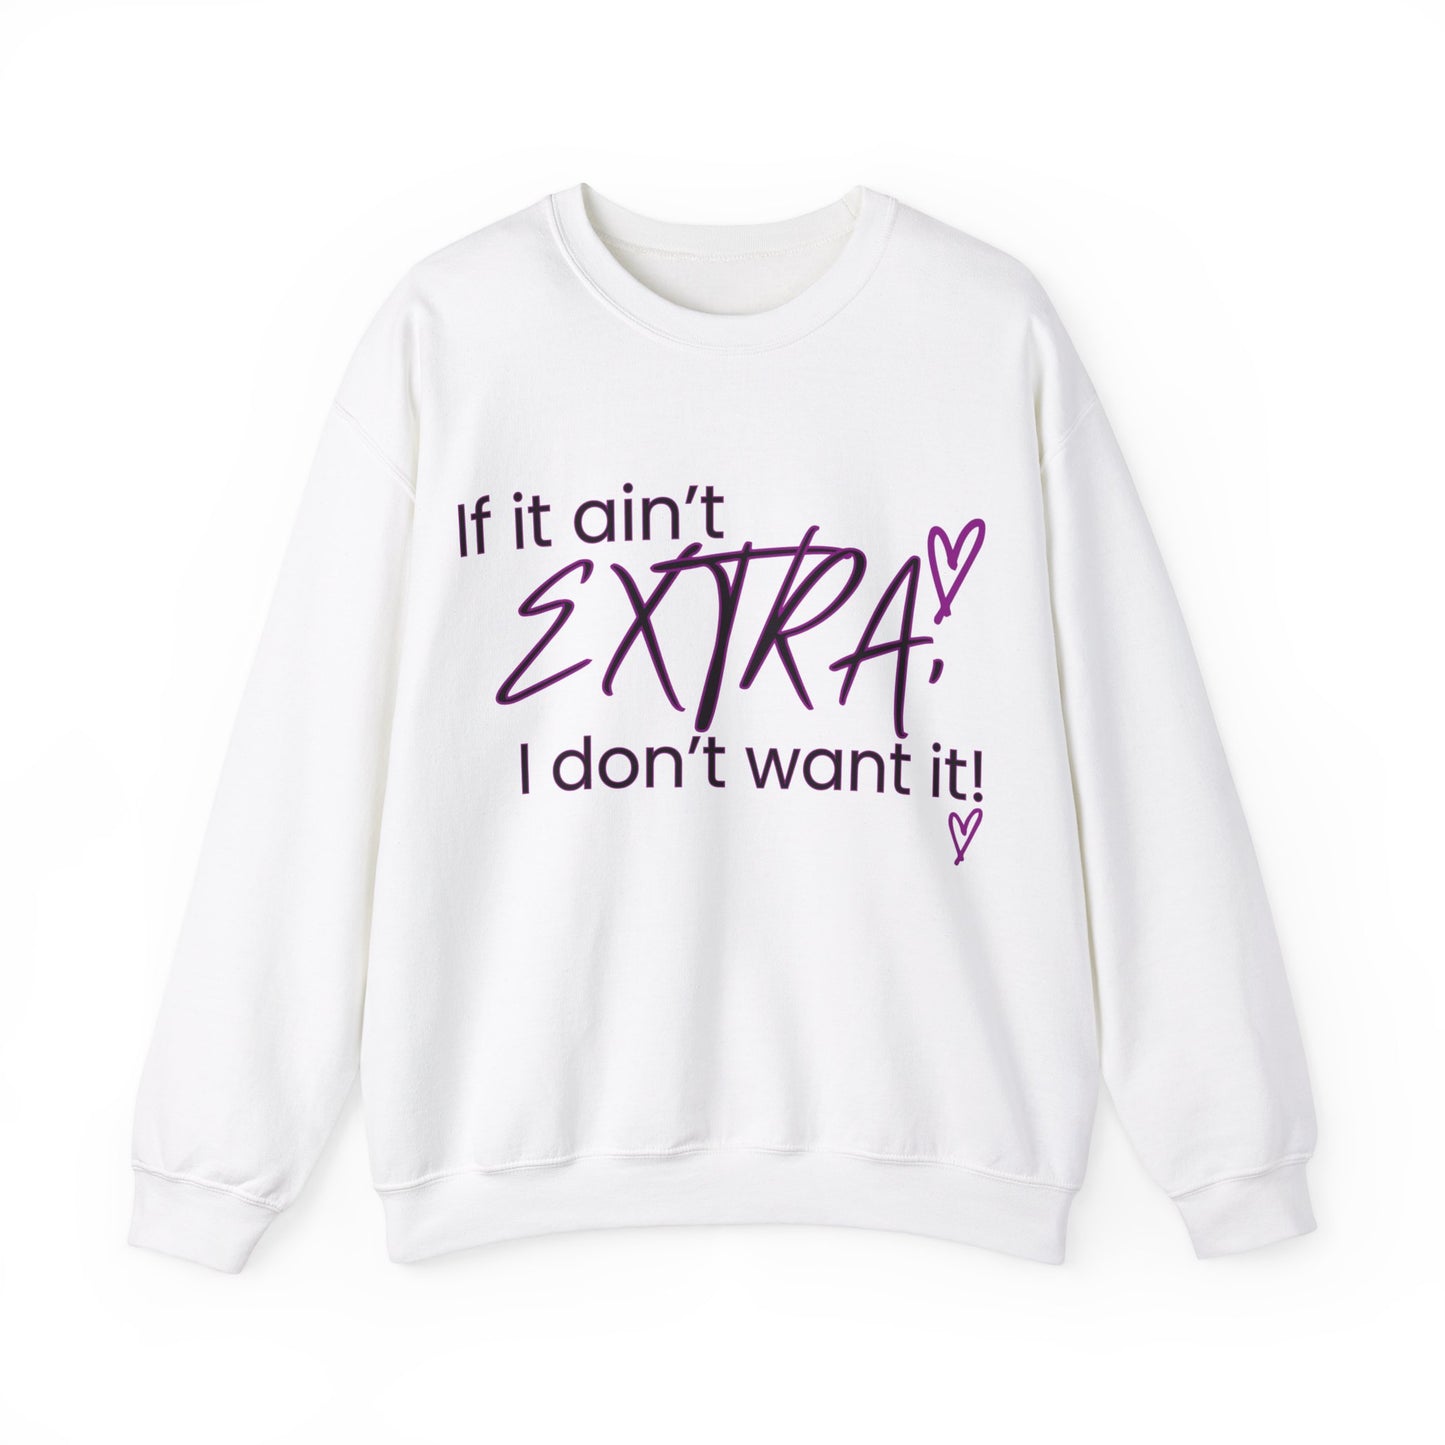 If It Ain't EXTRA I Don't Want It Sweatshirt - Stylish and Comfortable | Shop Now!